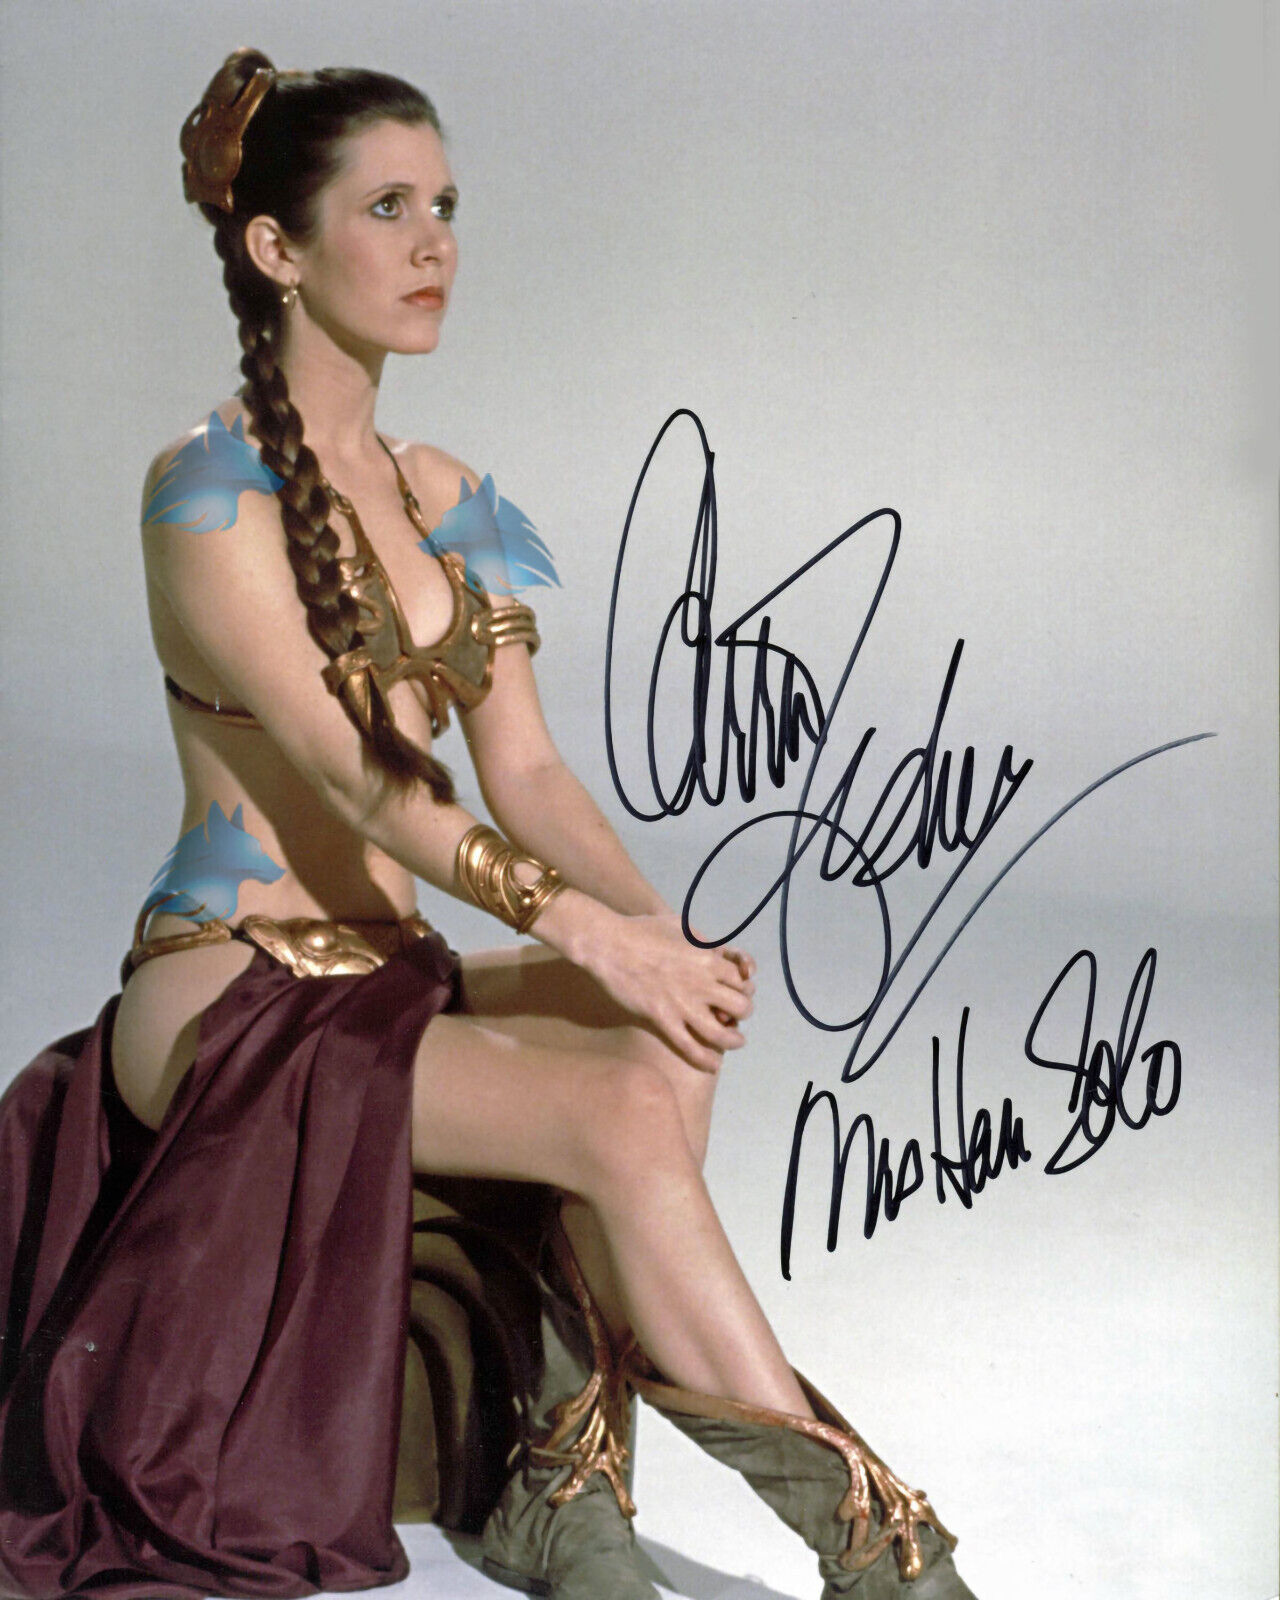 Carrie Fisher Star Wars Signed Photo as Mrs Han Solo Autograph 8x10